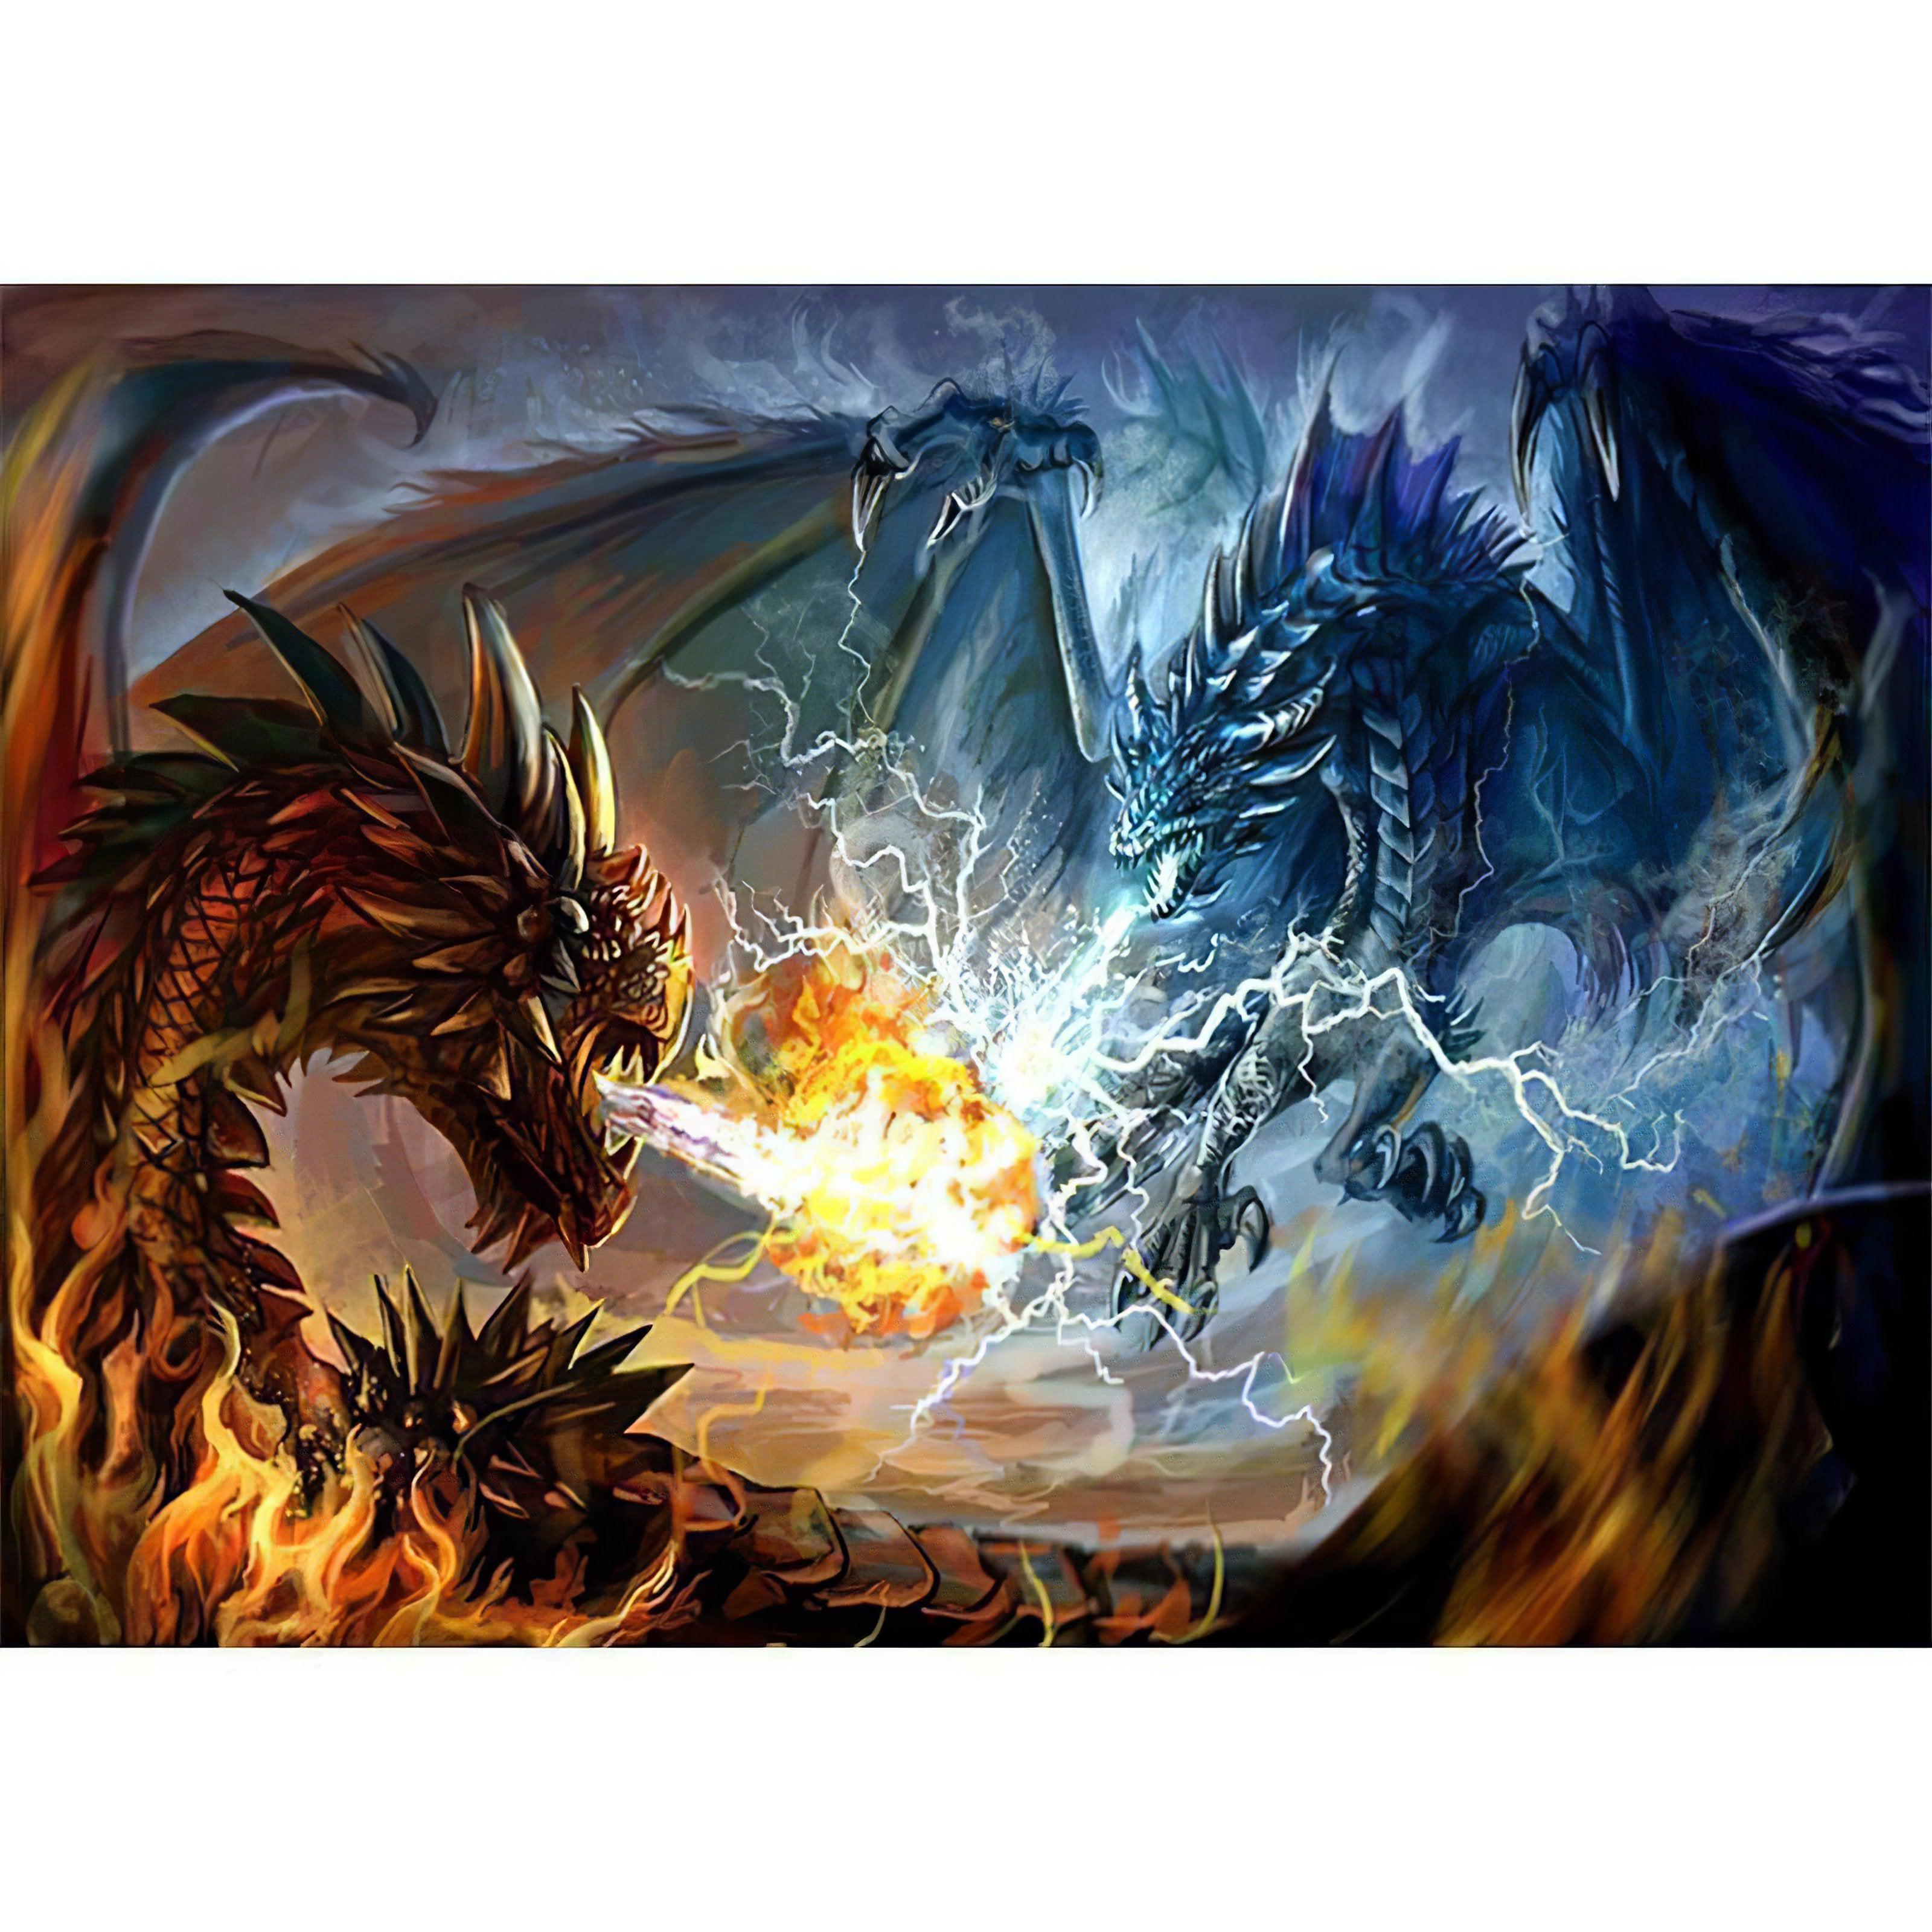 Epic battle between fire and lightning dragons unfolds.Fire Dragon Vs Lightning Dragon - Diamondartlove